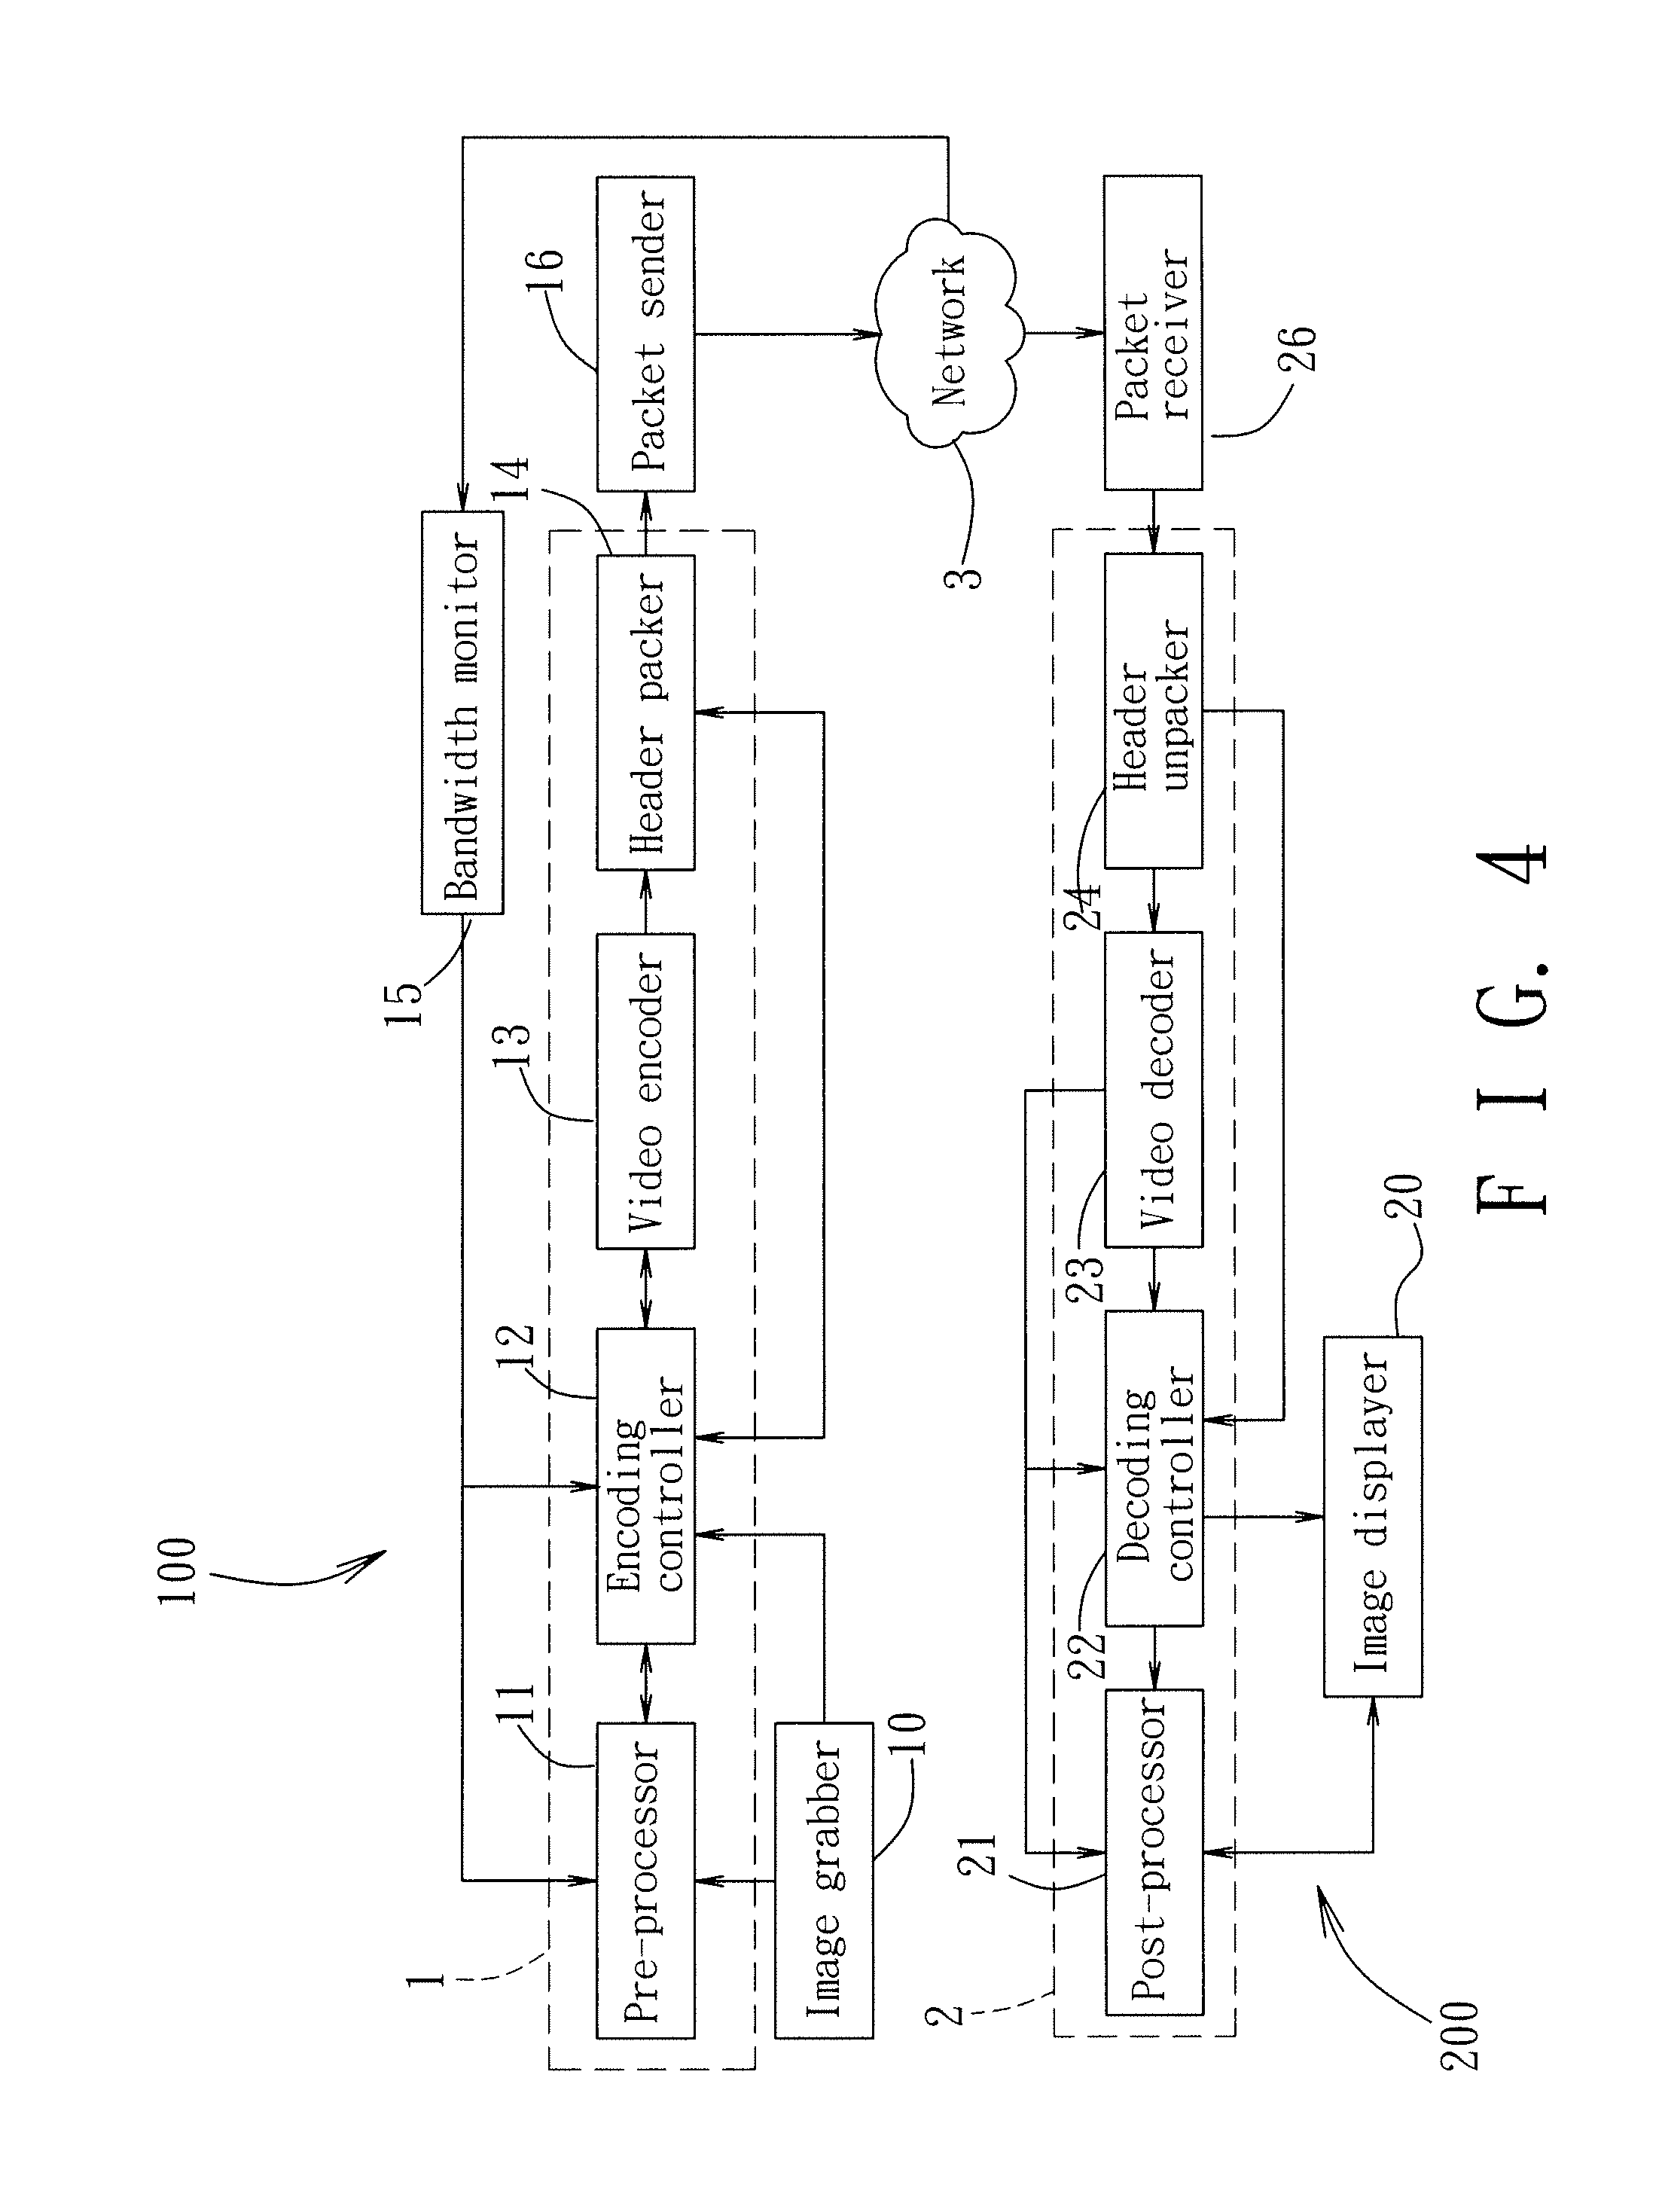 Video processing method, encoding device, decoding device, and data structure for facilitating layout of a restored image frame